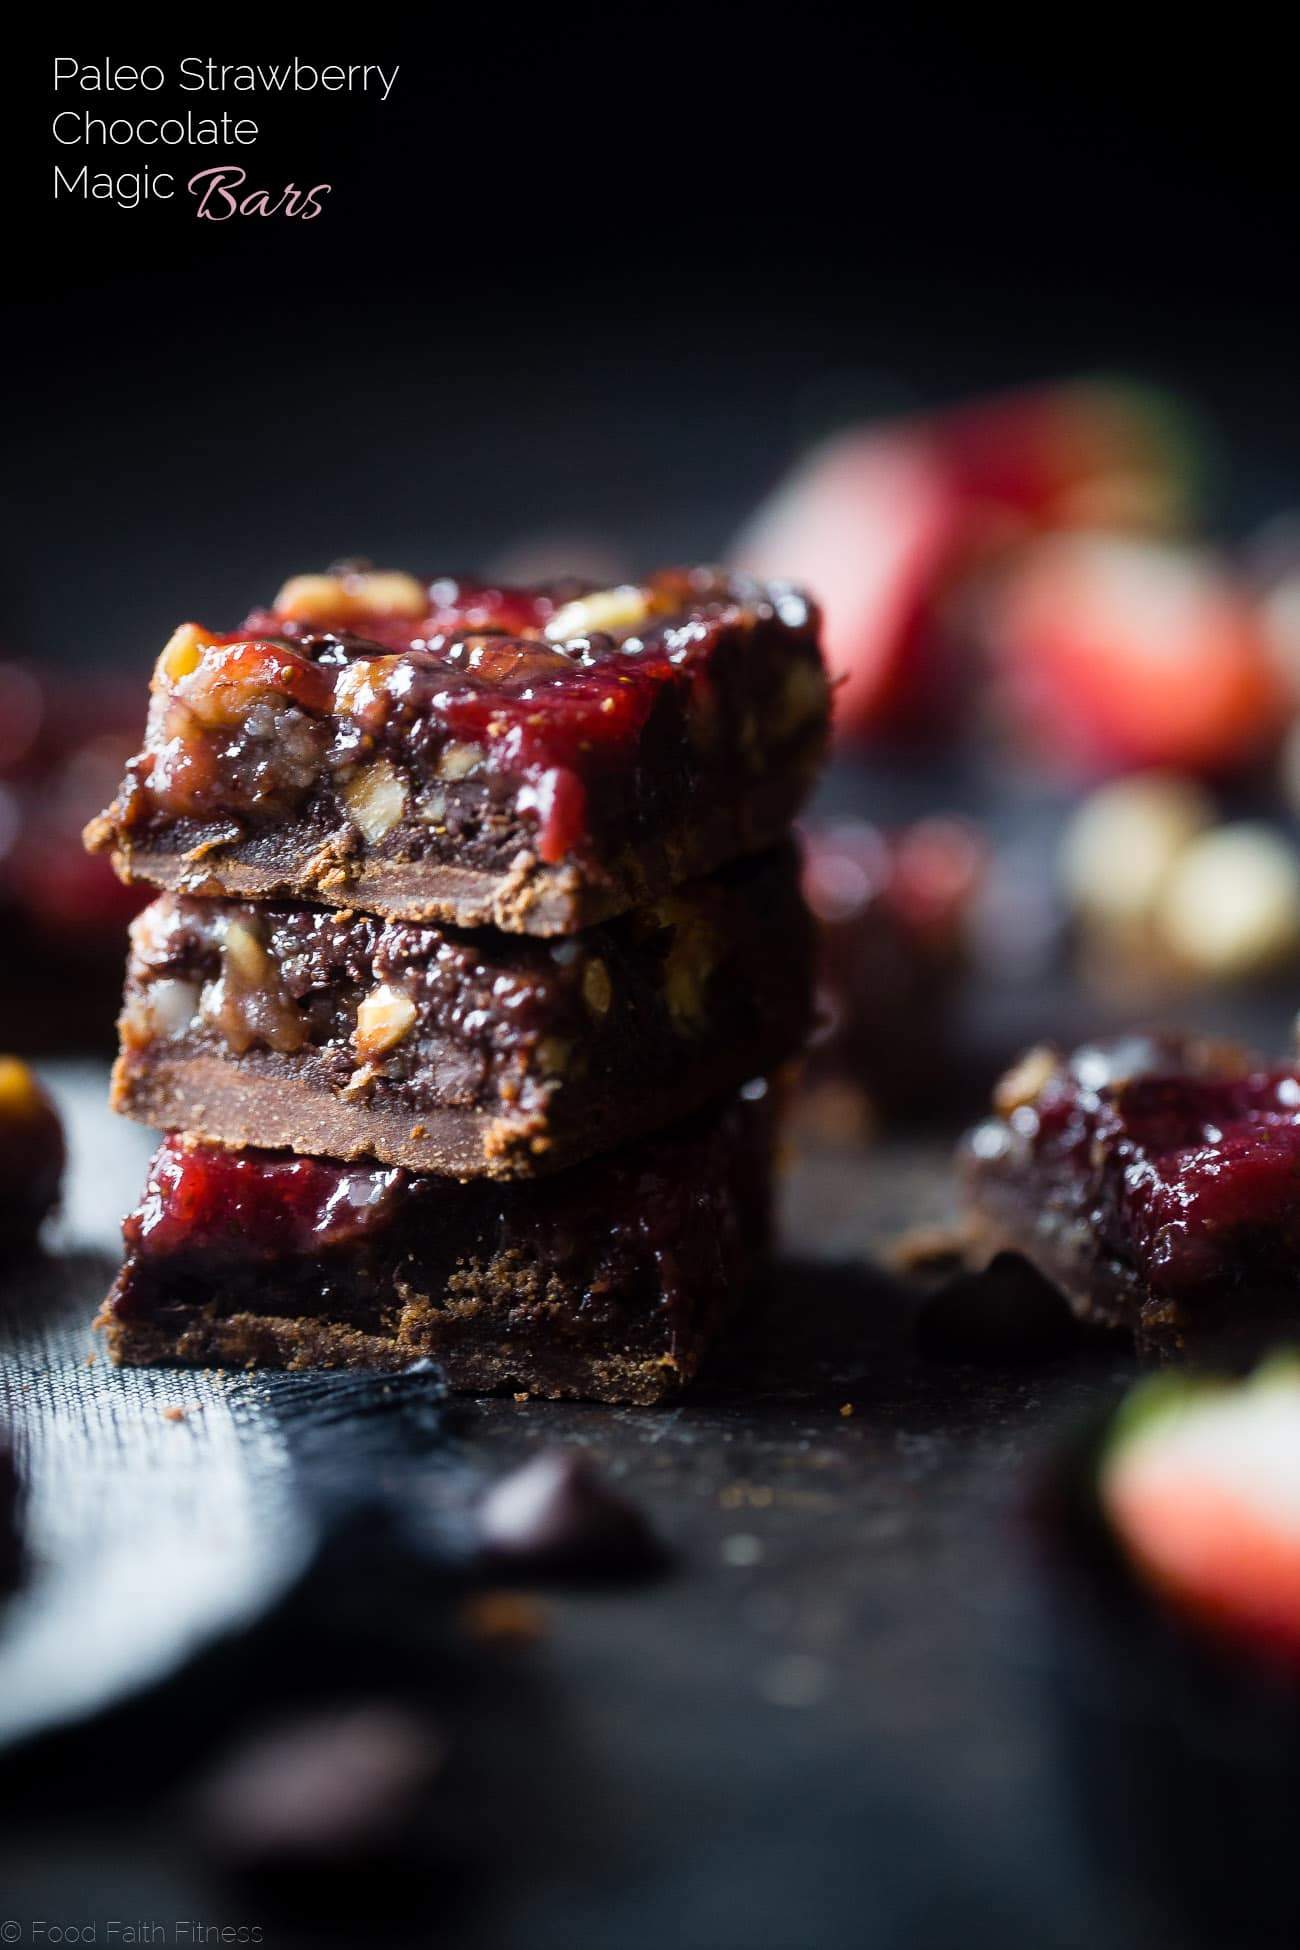 Strawberry Chocolate Paleo Magic Cookie Bars - These magic cookie bars have a sweet strawberry swirl and are SO easy to make! They're a healthy, vegan friendly and gluten free remake of the classic recipe that everyone will love! | Foodfaithfitness.com | @FoodFaithFit